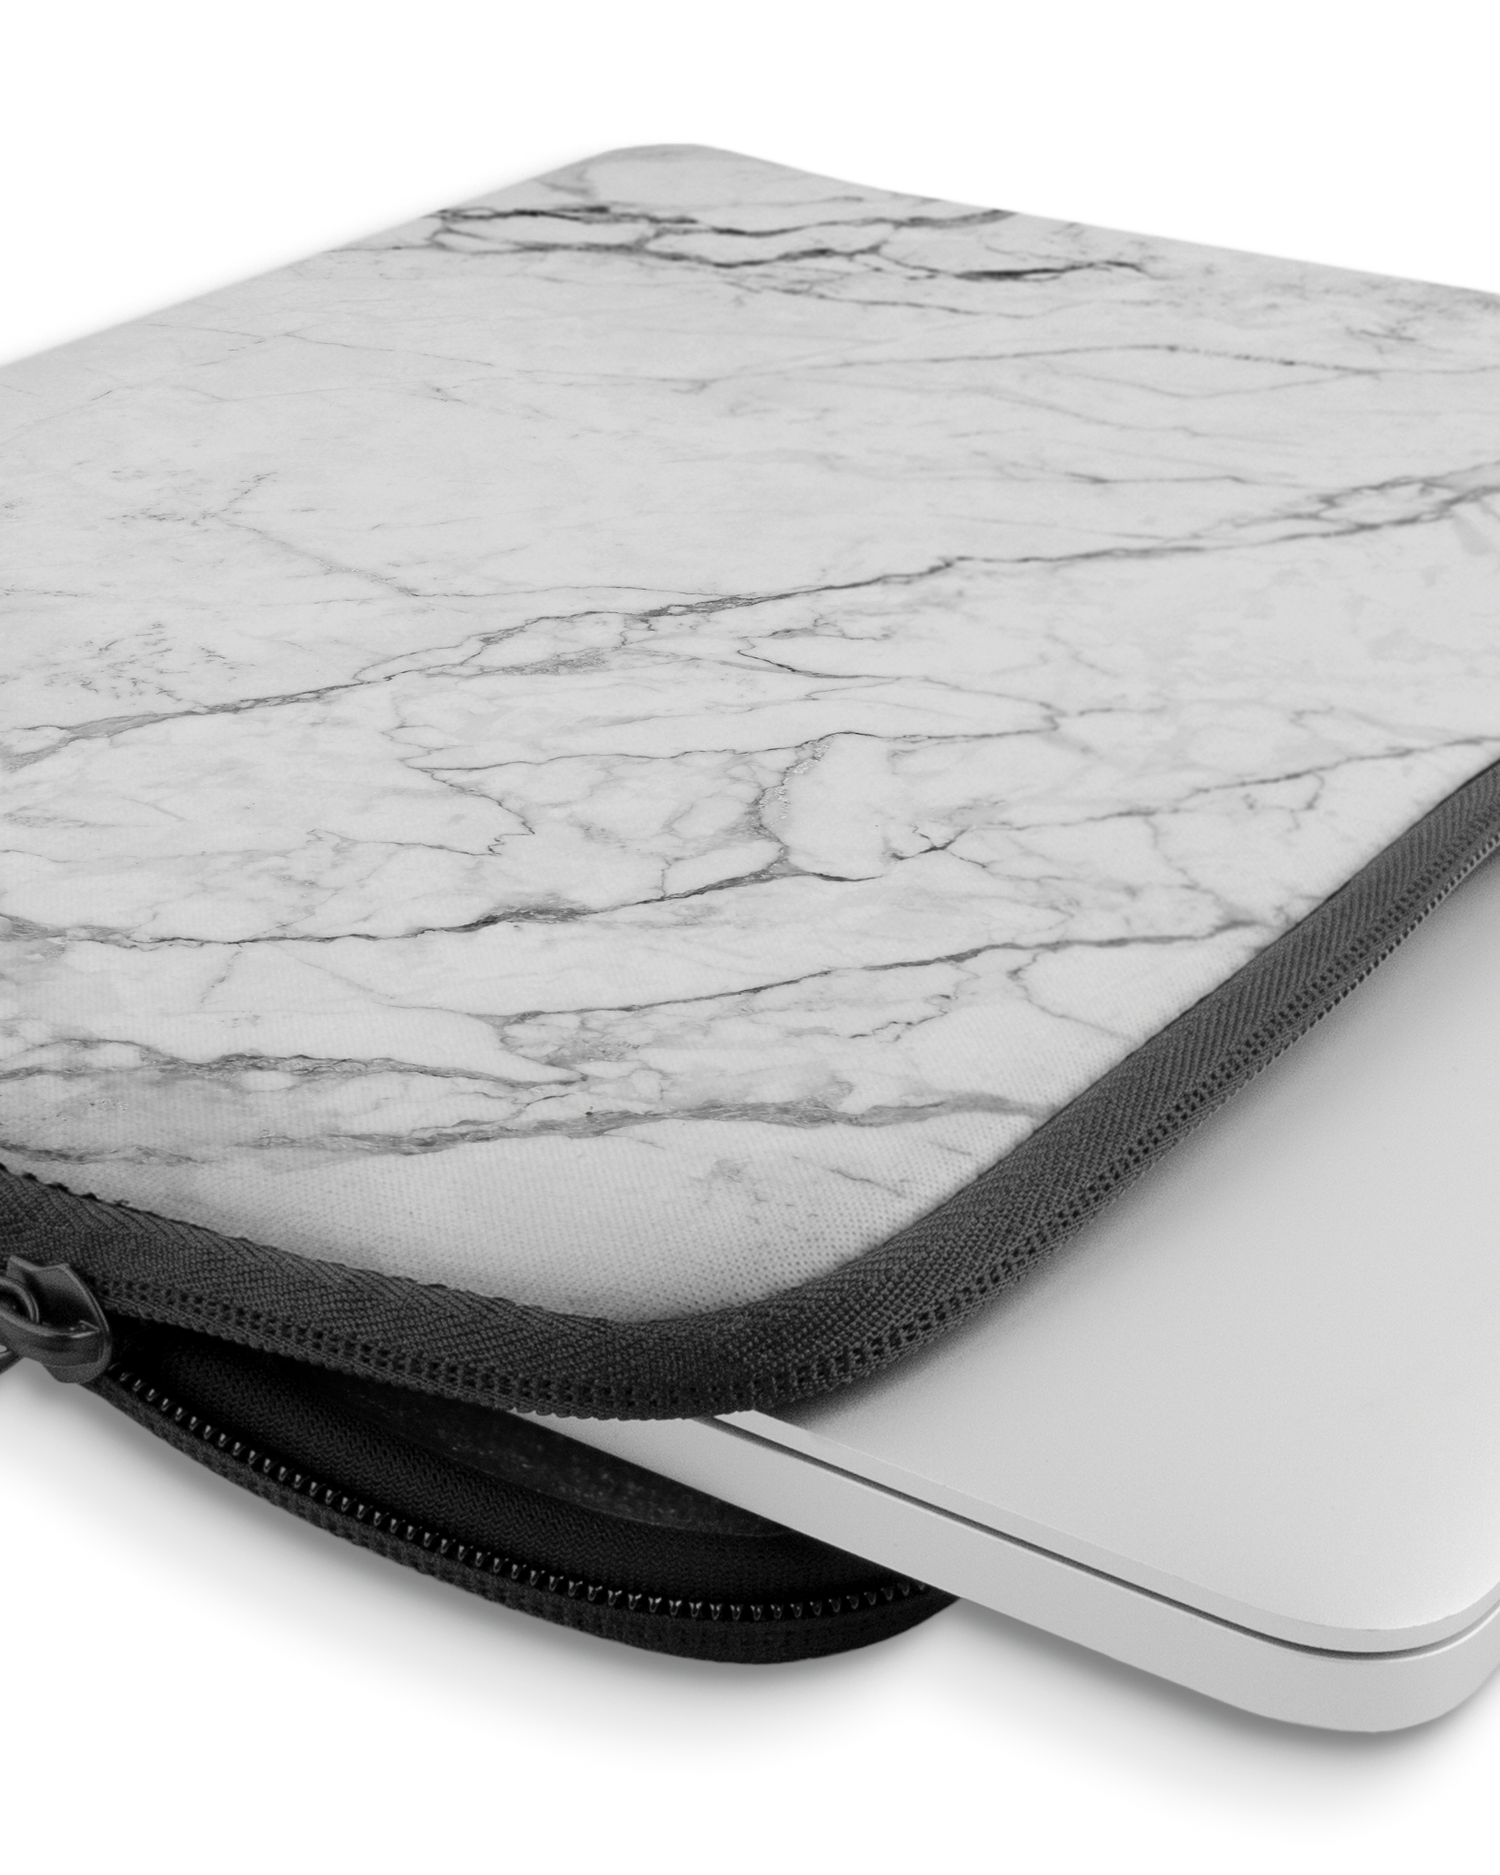 White Marble Laptop Case 13-14 inch with device inside